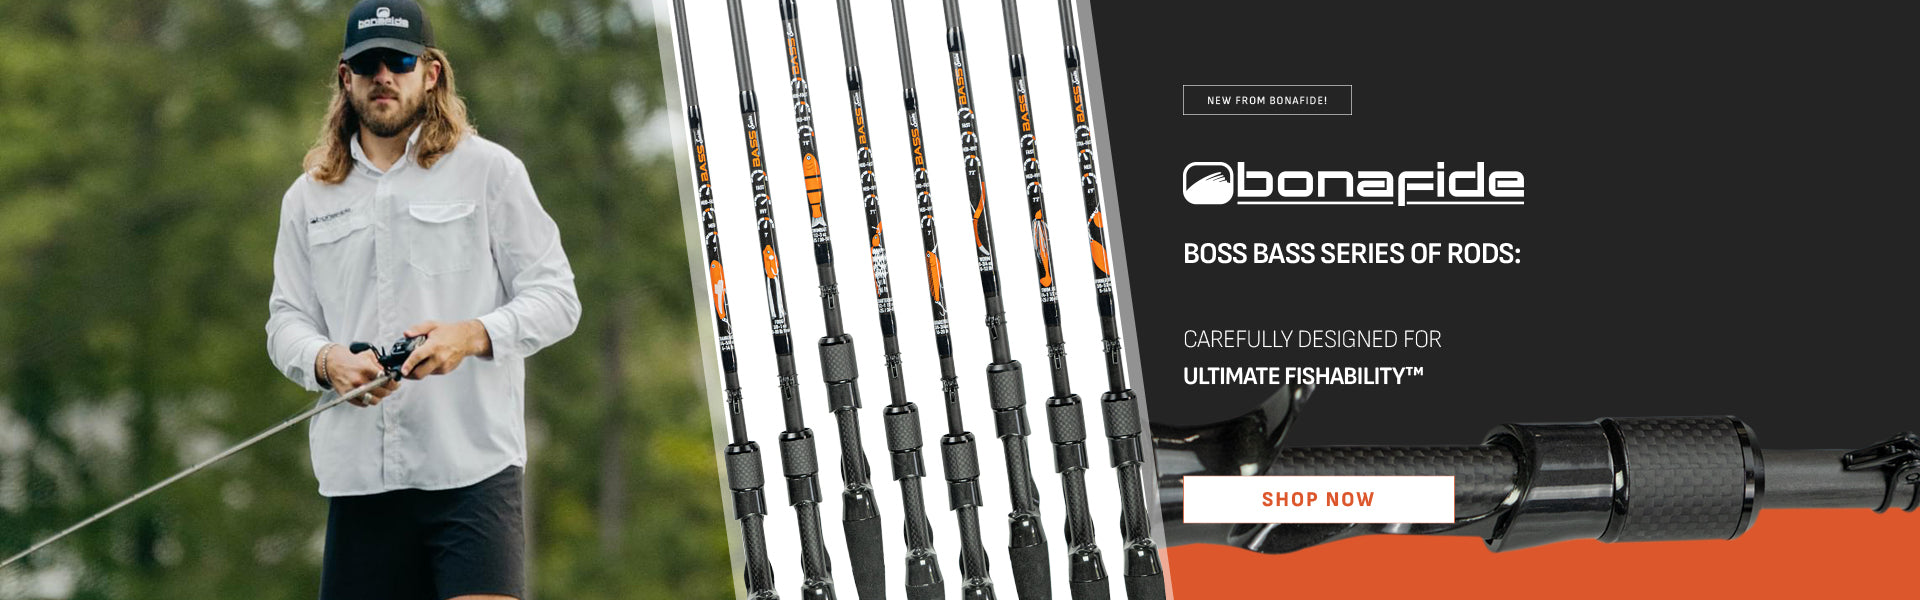 New From Bonafide®! The Bonafide Boss Bass Series of Rods: Carefully Designed for Ultimate Fishability™. Shop Now